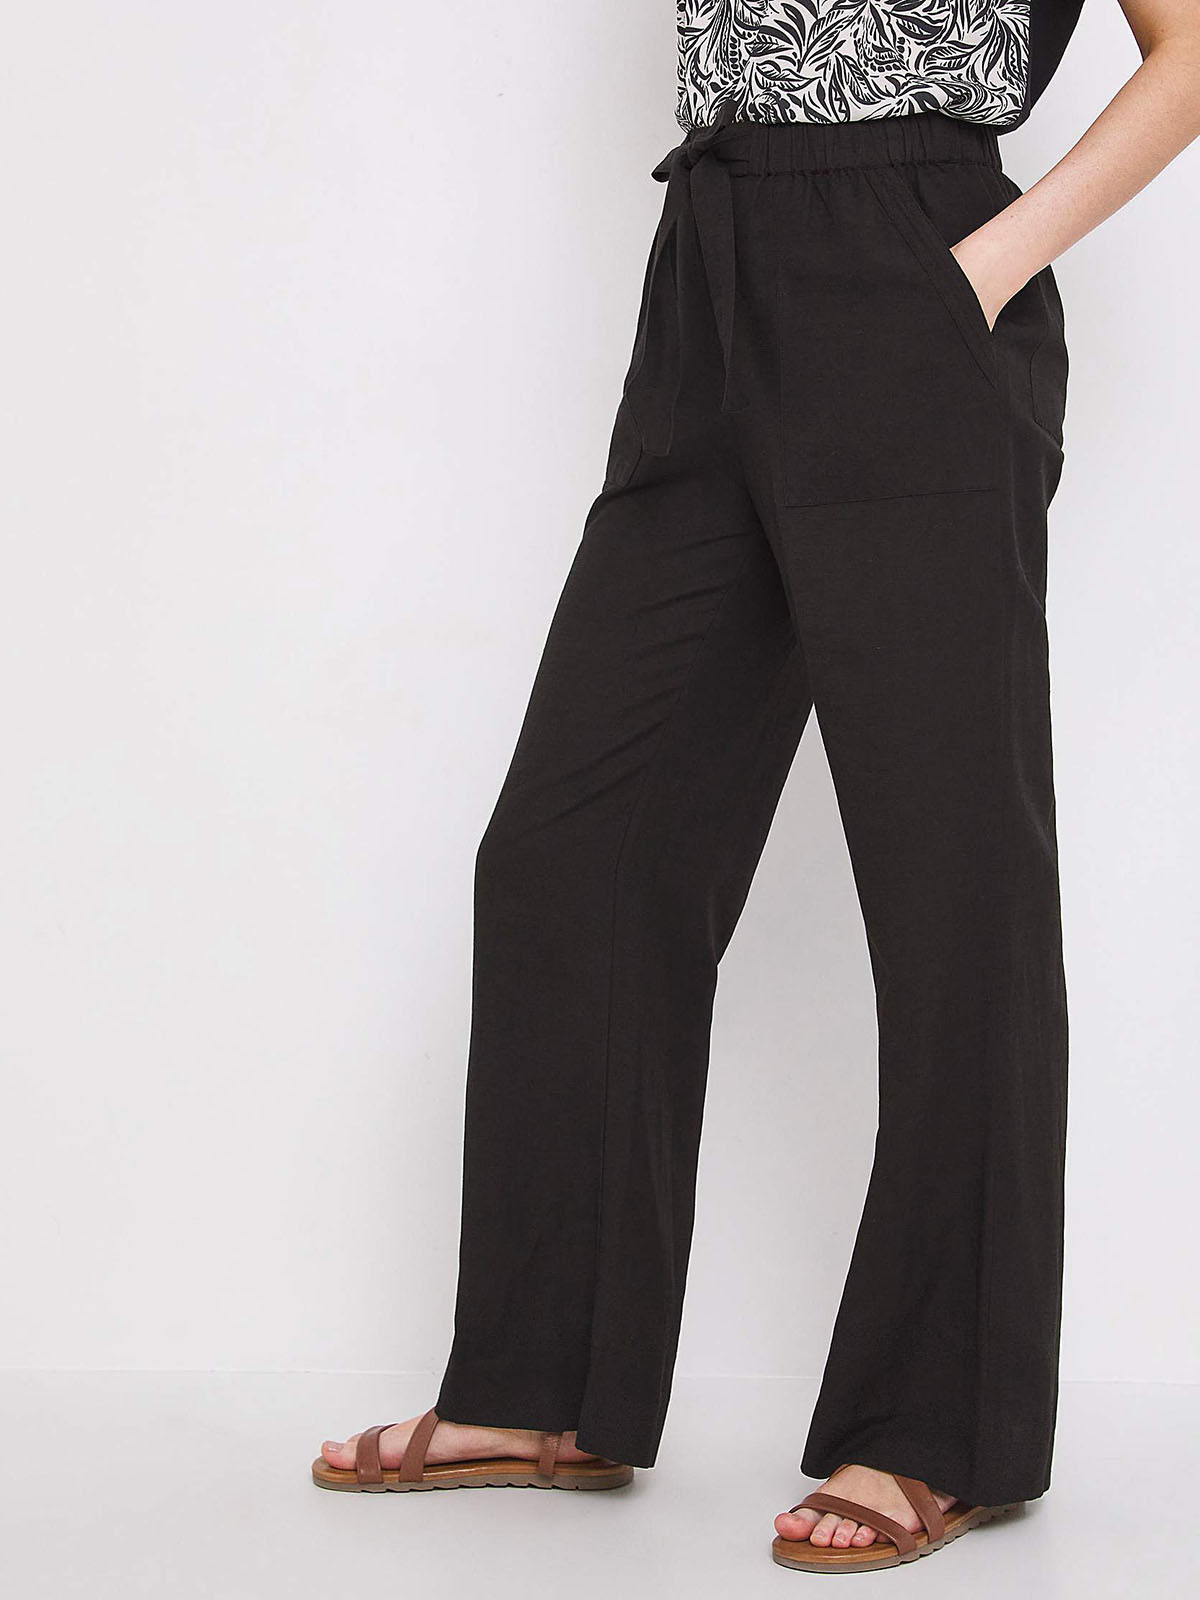 theRebelinme Trousers and Pants  Buy theRebelinme Plus Size Womens Black  Solid Color Knitted High Rise Linen Trouser Online  Nykaa Fashion